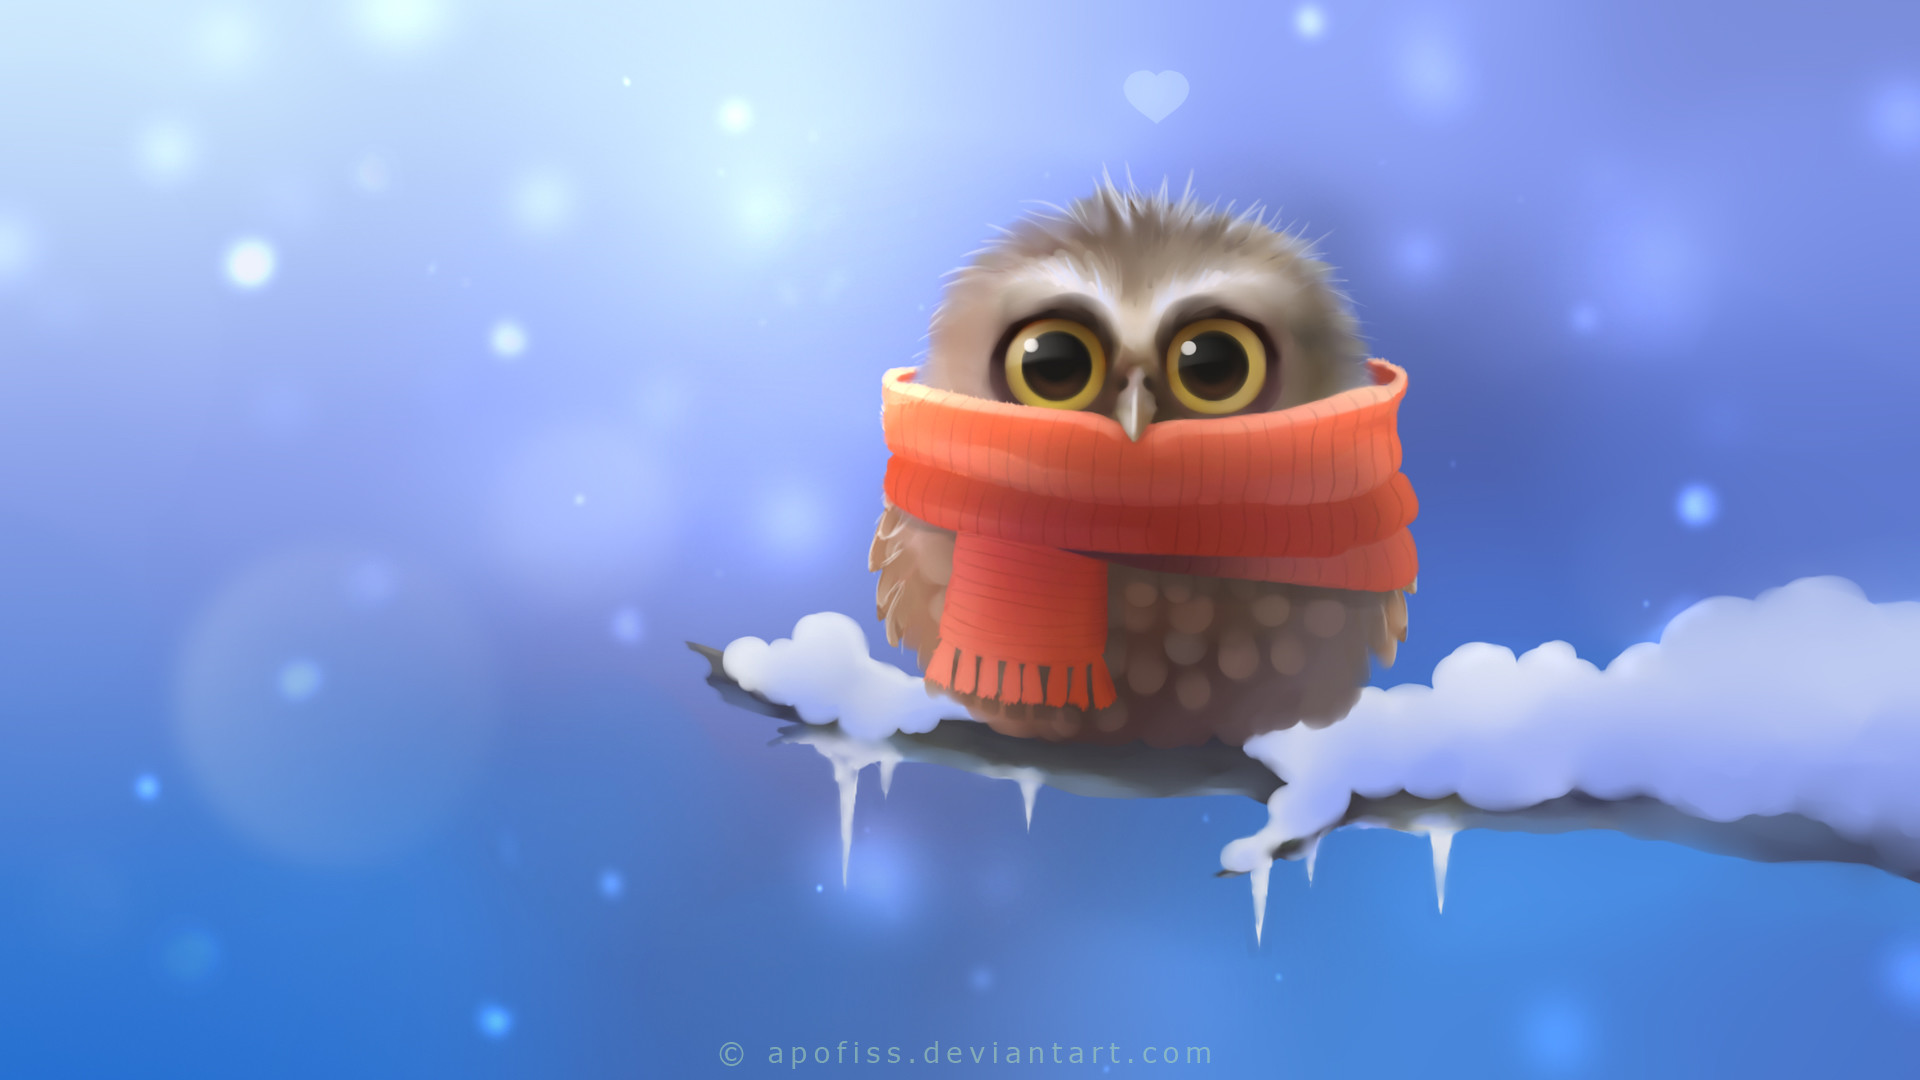 1920x1080 Cute Owl (iPhone 5,5c,5S,SE ,Ipod Touch)